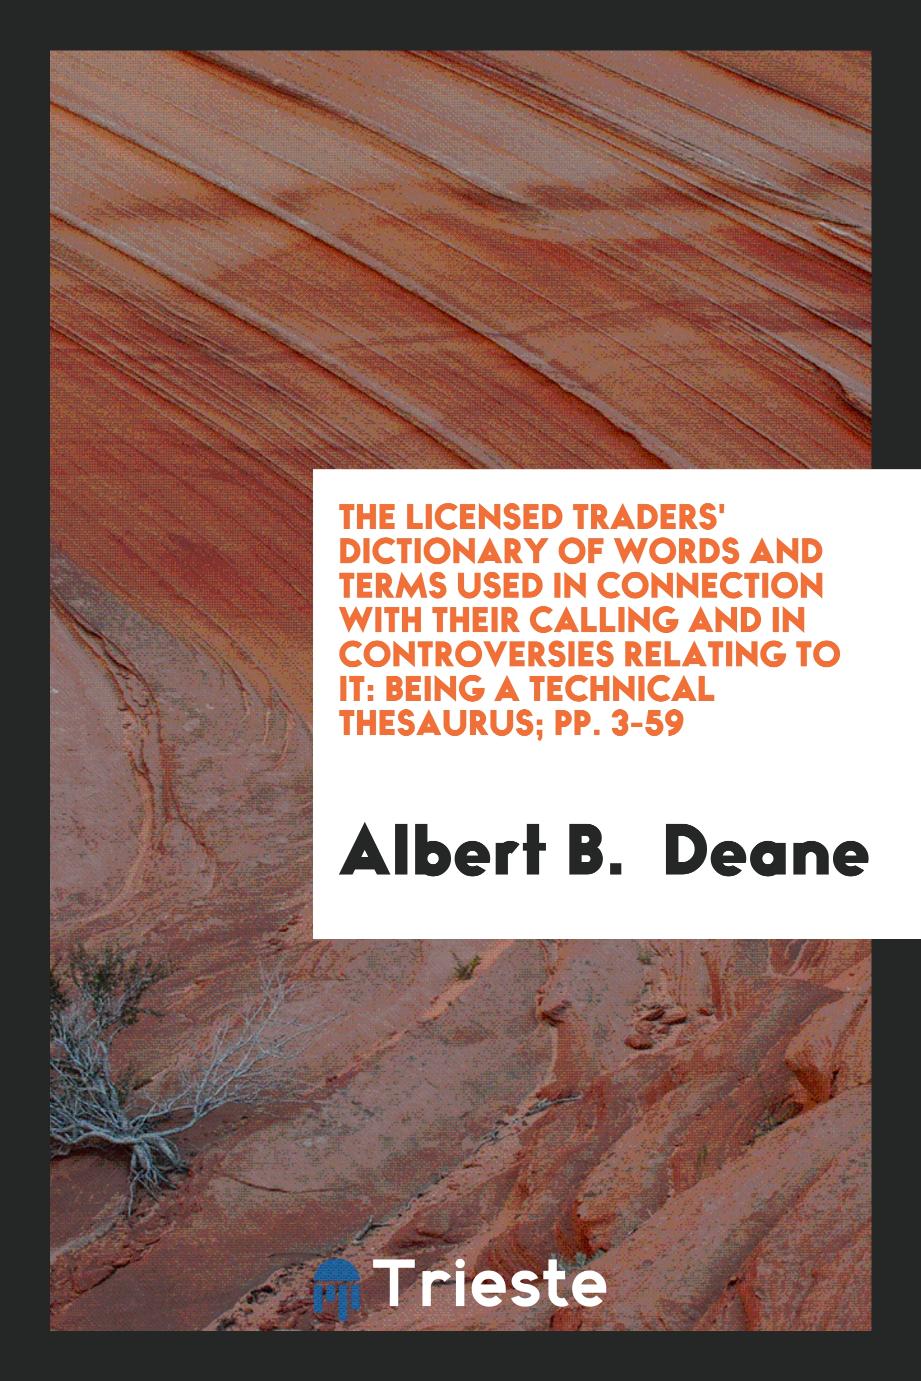 The Licensed Traders' Dictionary of Words and Terms Used in Connection with Their Calling and in controversies relating to it: being a technical thesaurus; pp. 3-59